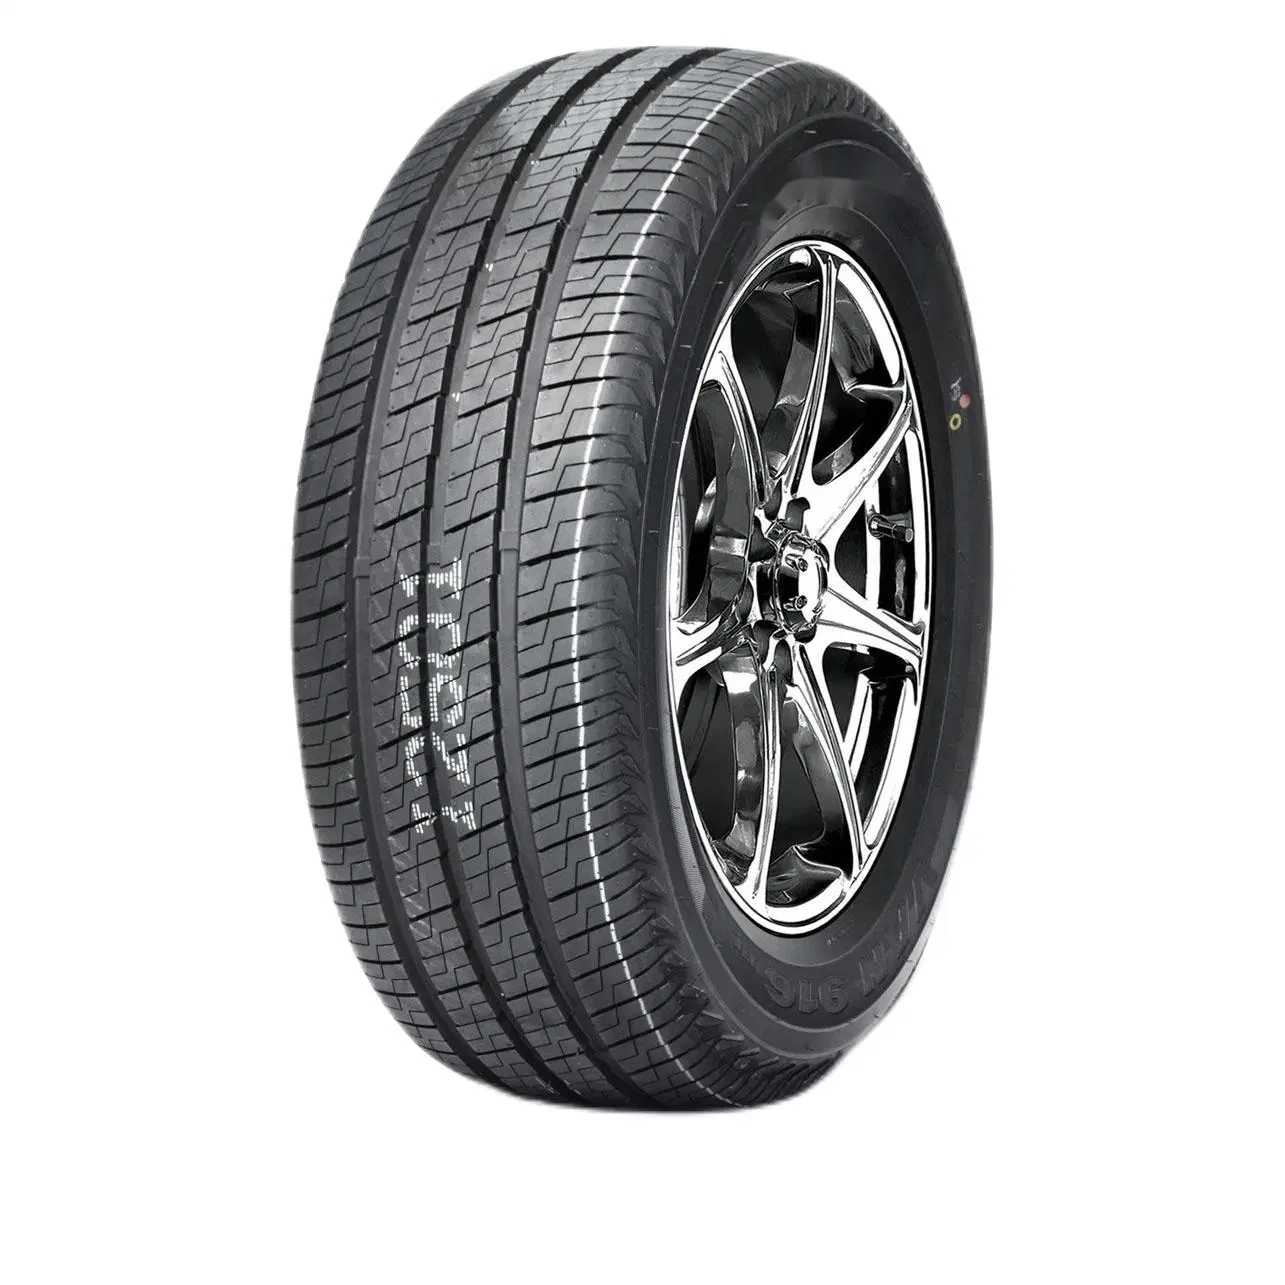 High Quality Factory SUMMER Tyre Passenger Car Tire van tire 195/70R15C other car accessories